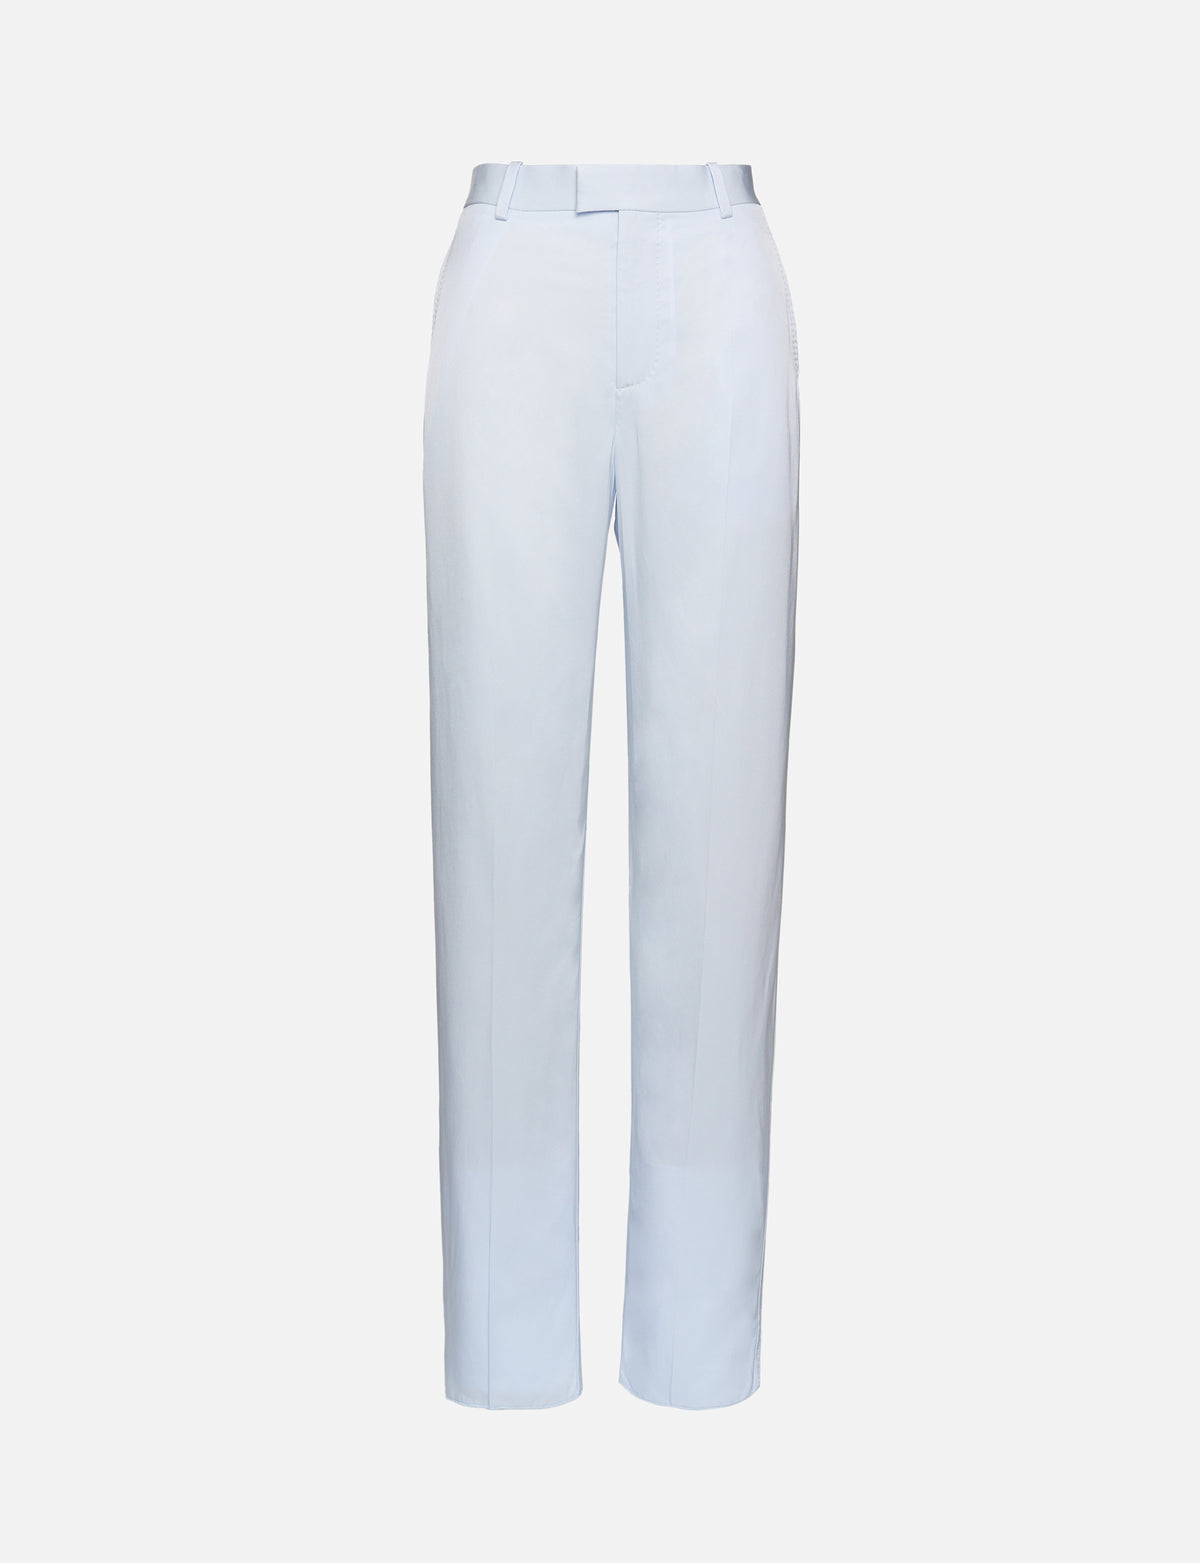 view 1 - Fluid Straight Lined Trouser